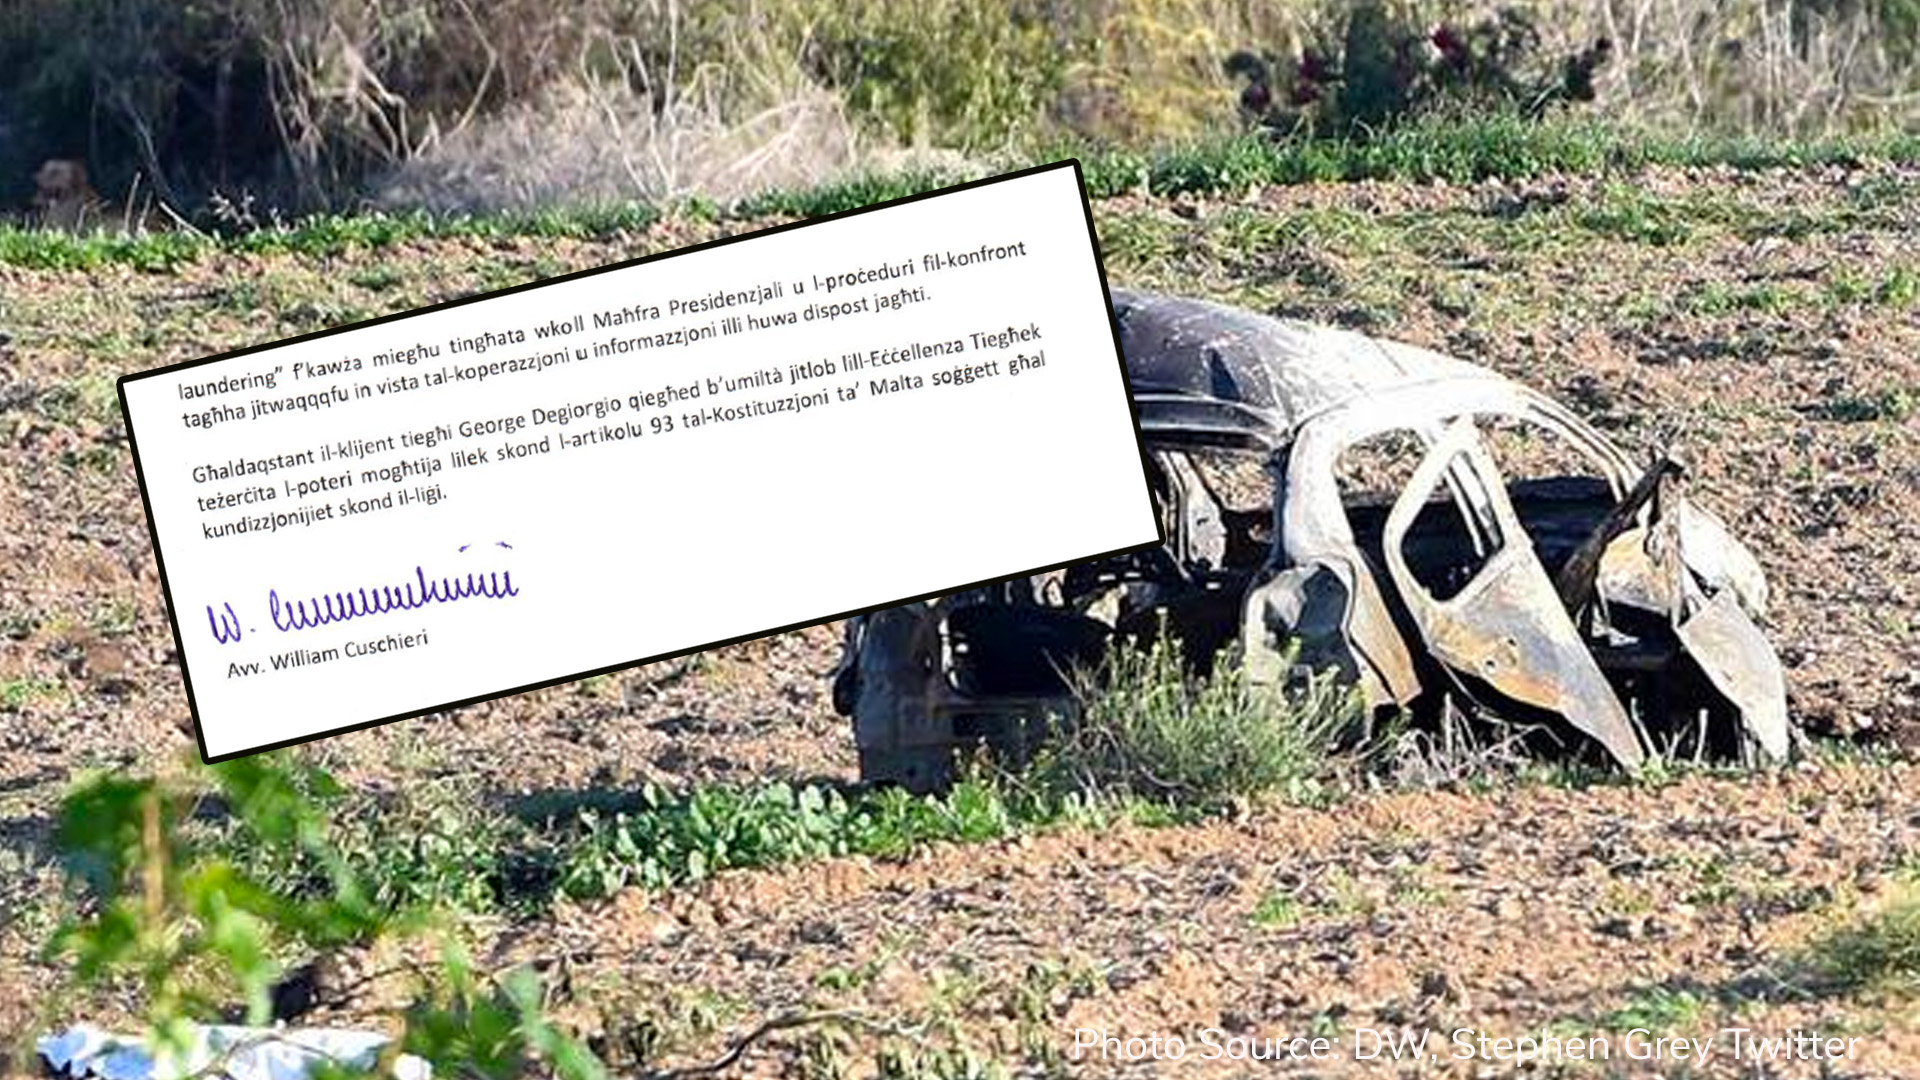 Caruana Galizia bombers will reveal Minister linked to crime if granted pardon and immunity